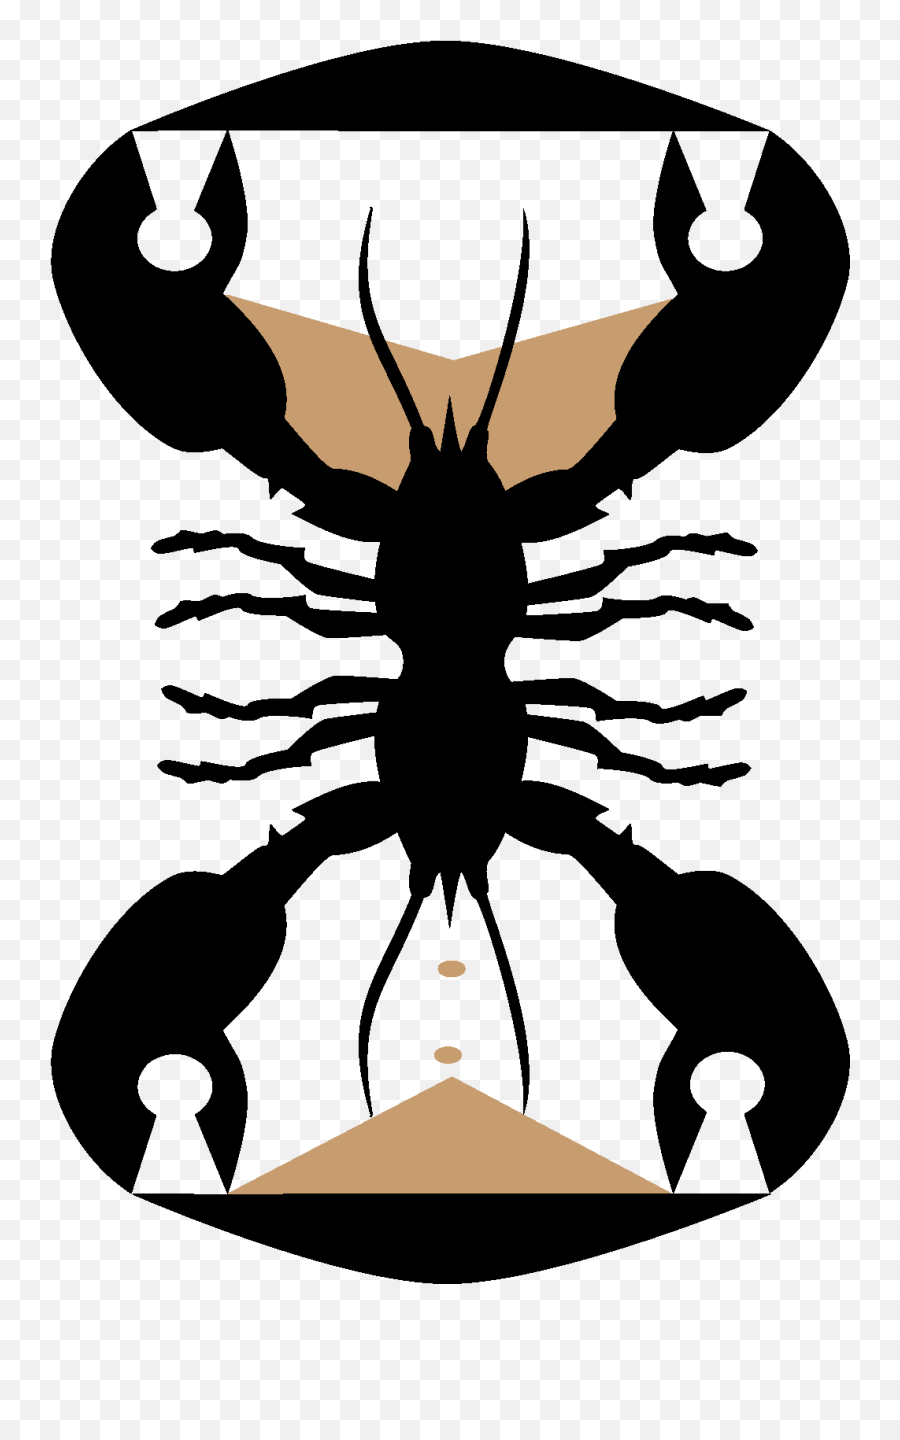 Hourglass Lobster - Lobster Clipart Full Size Clipart Emoji,Lobster Clipart Black And White